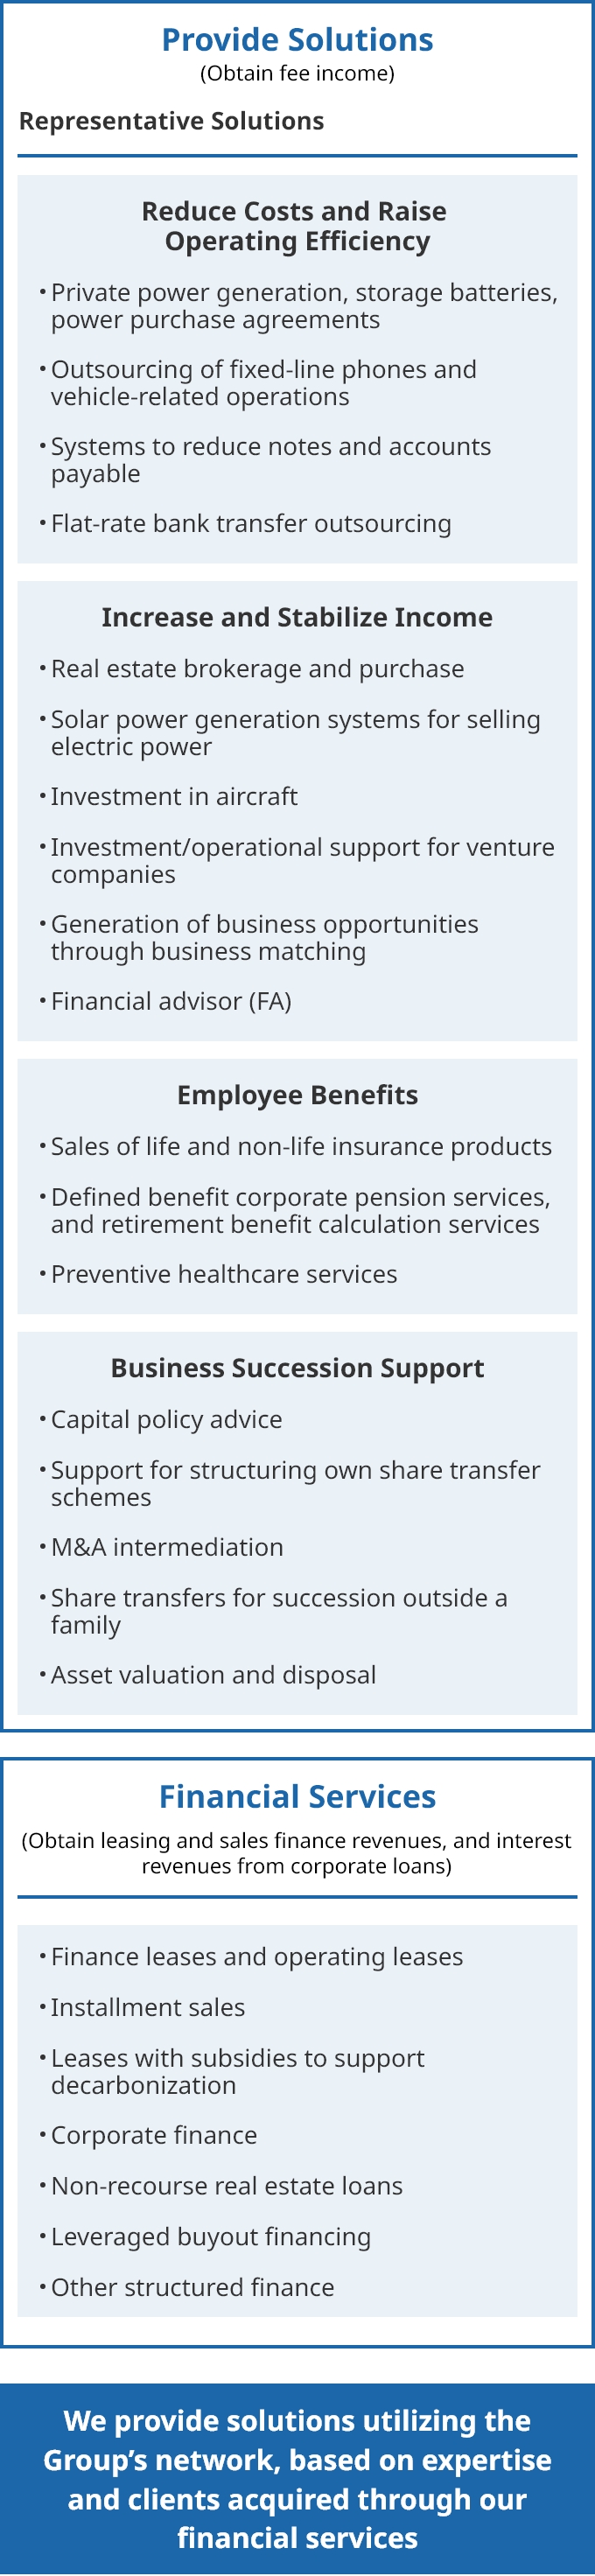 Broad Array of Products and Services from Corporate Financial Services